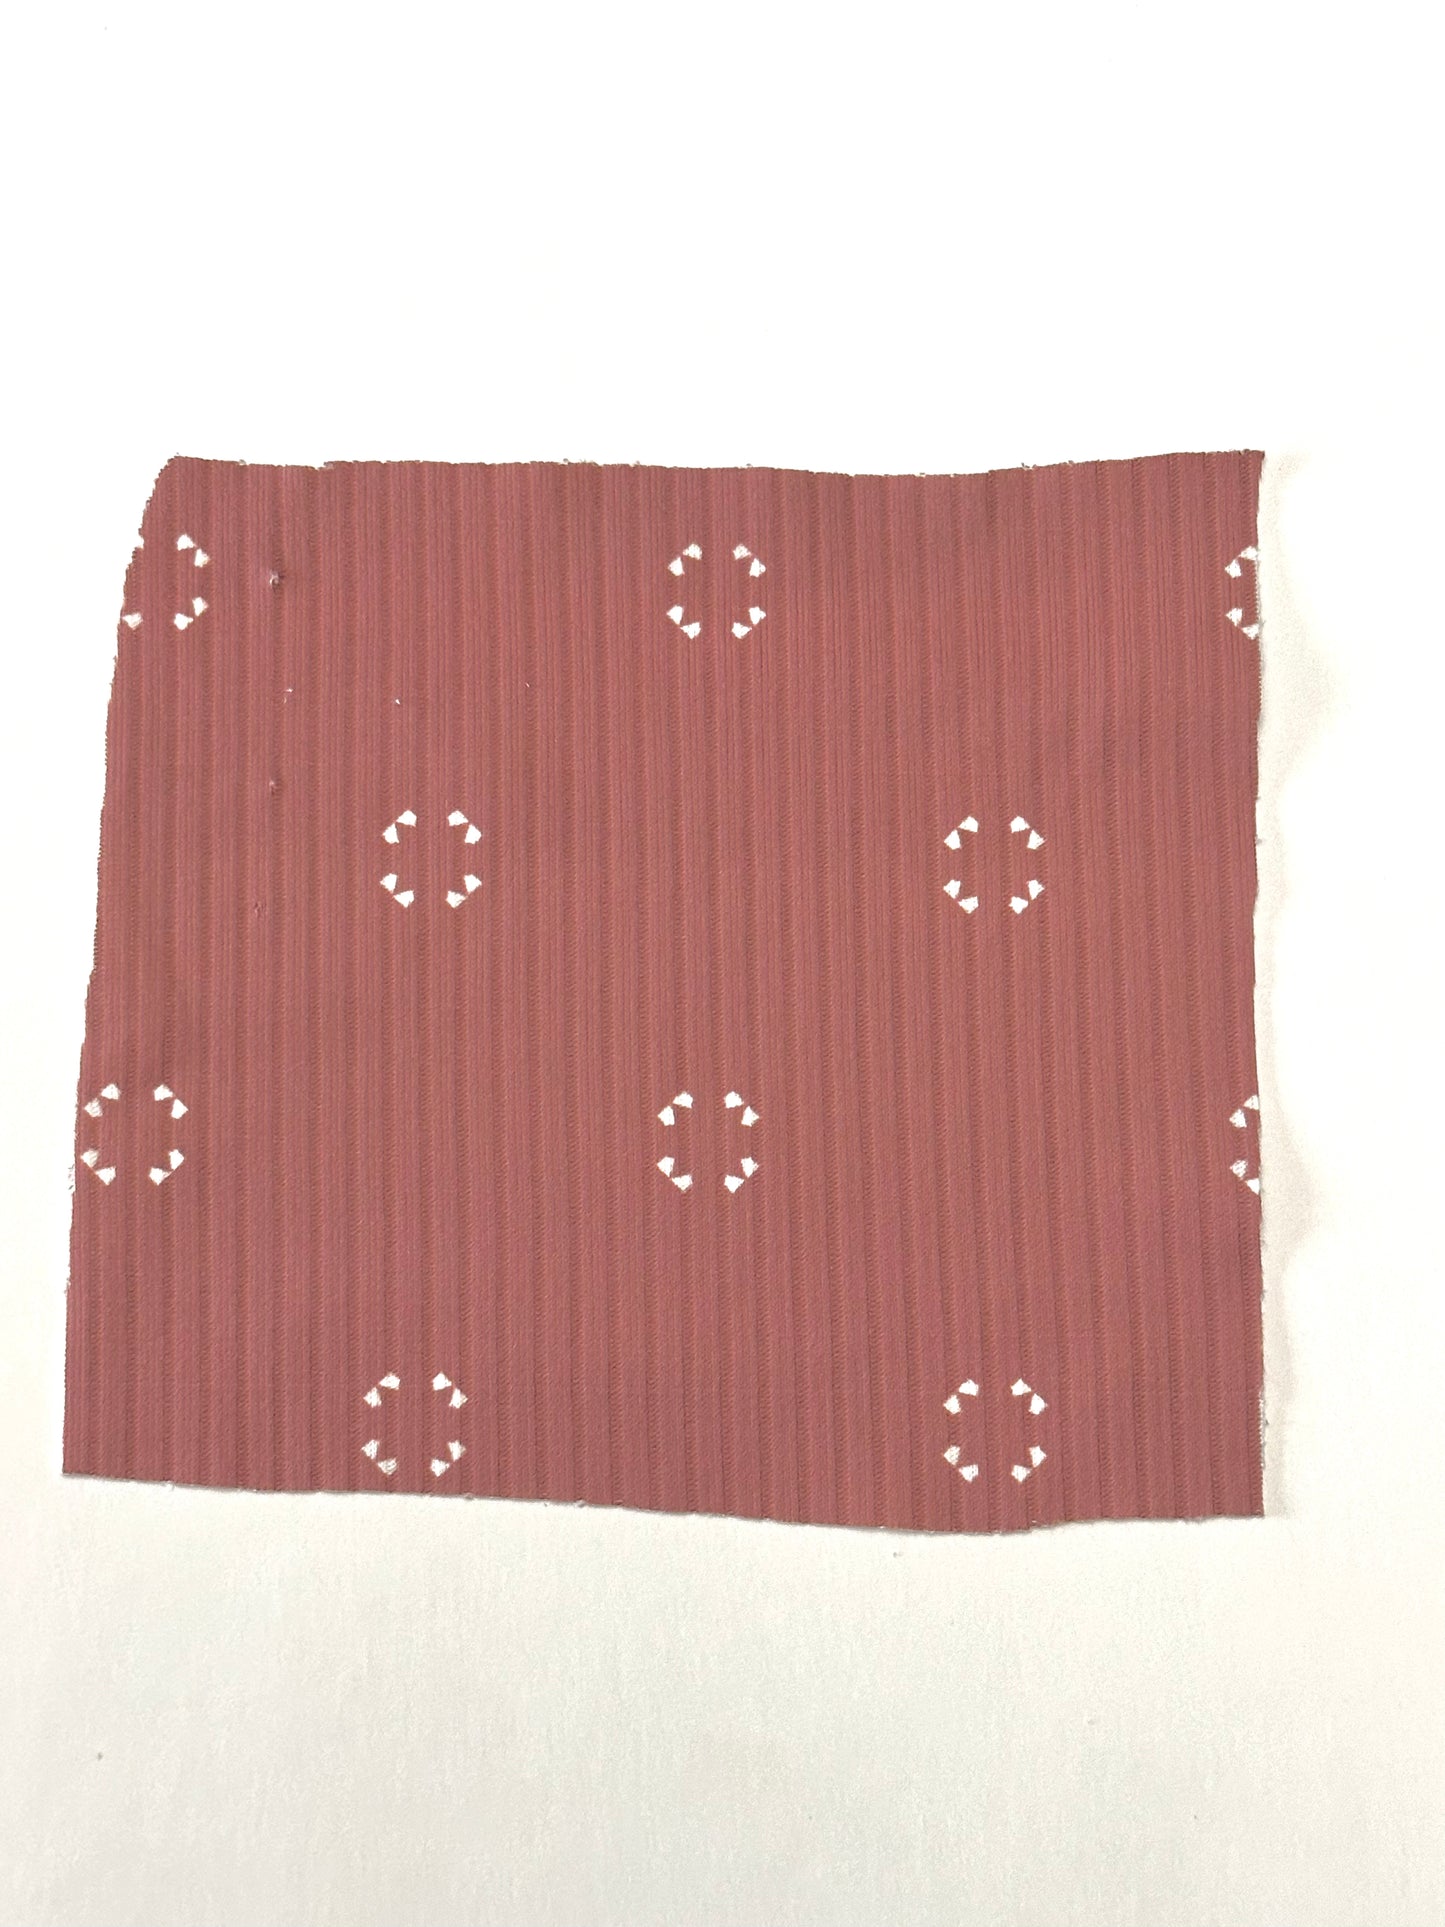 Pre-Order Geometric Print in Rose on Unbrushed Rib Knit Fabric Sold by the 1/4 yard